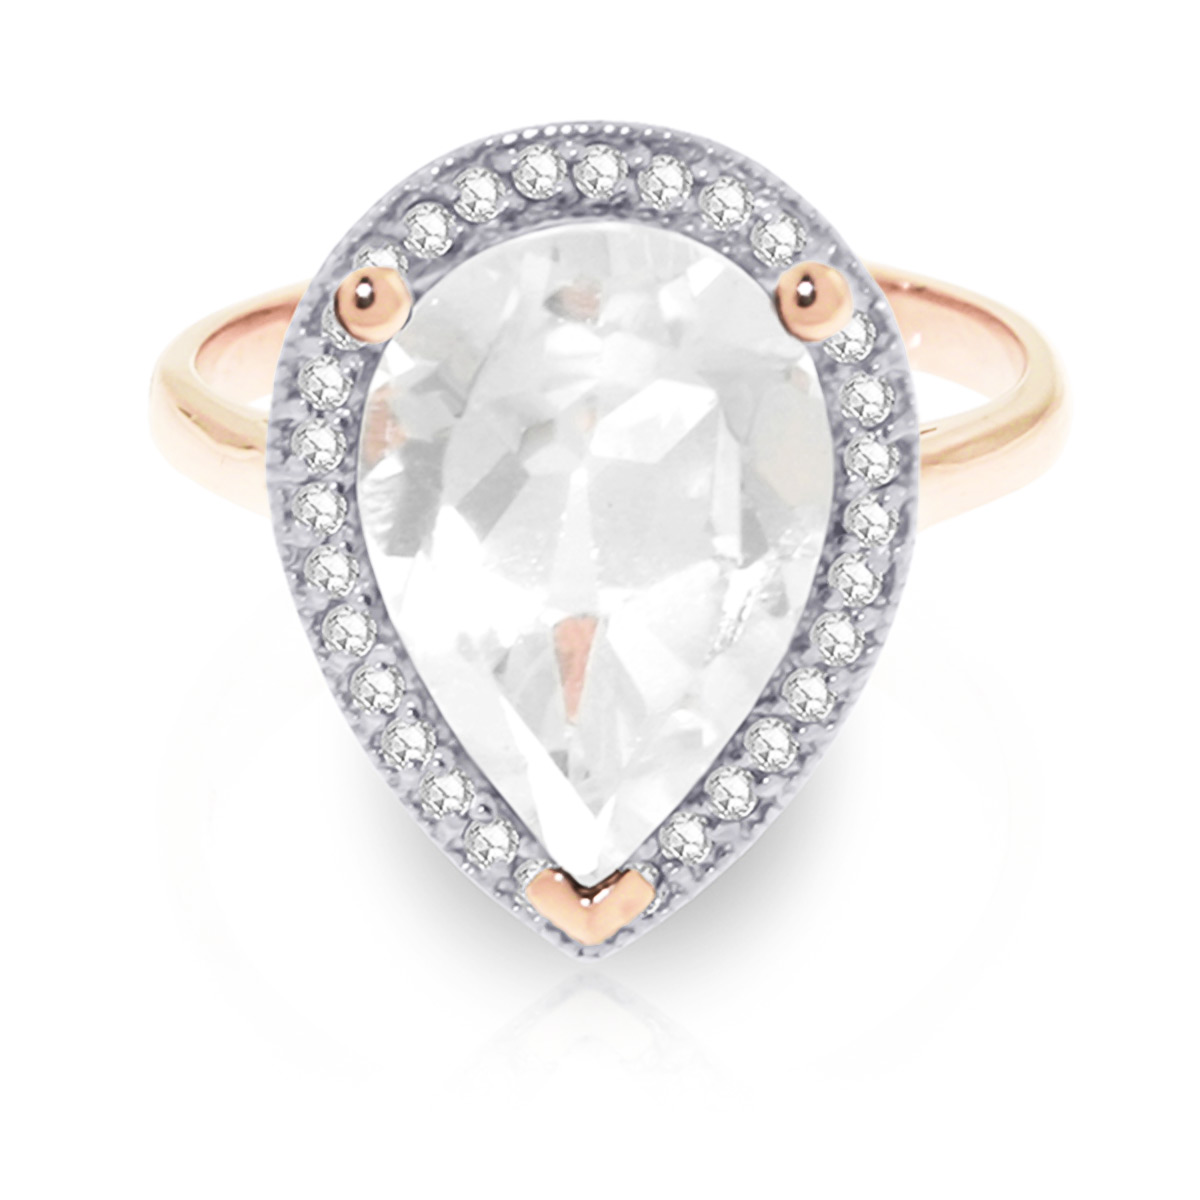 White Topaz Halo Ring 5.61 ctw in 9ct Rose Gold